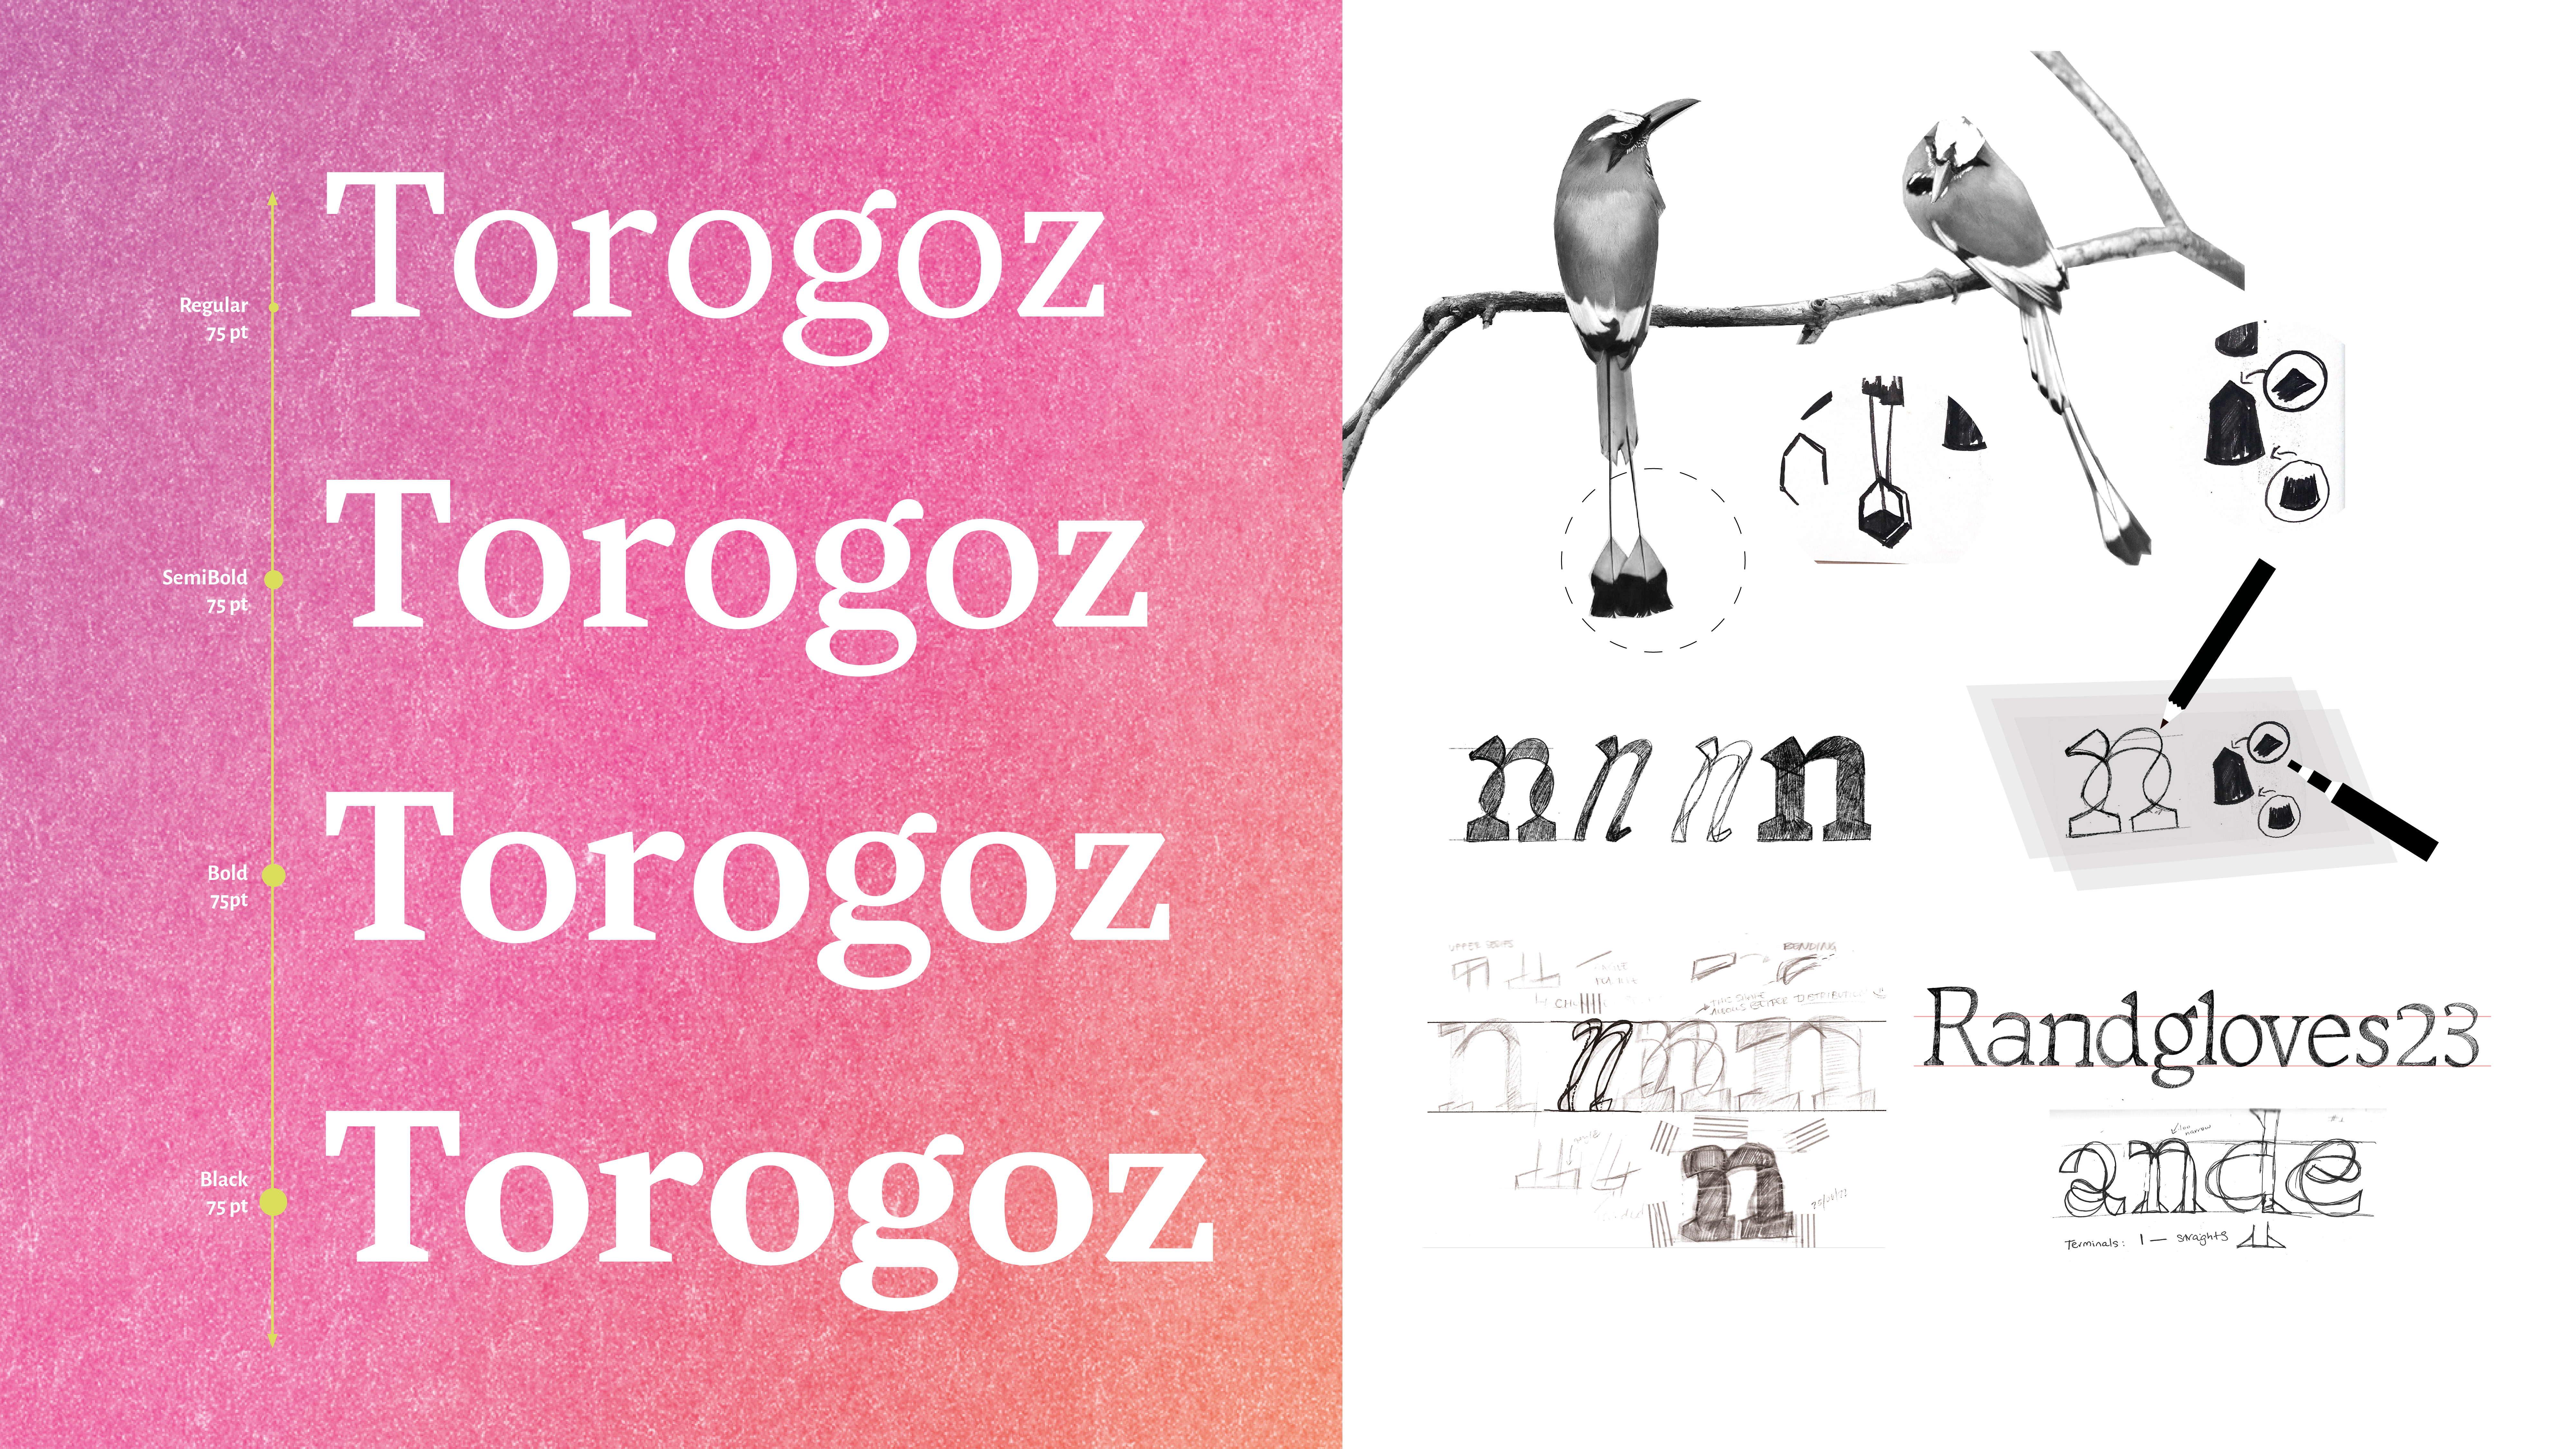 Left side: Name of the typeface in 4 different weights. Right side: Pencil sketches and two pictures of the bird Torogoz in black and white.